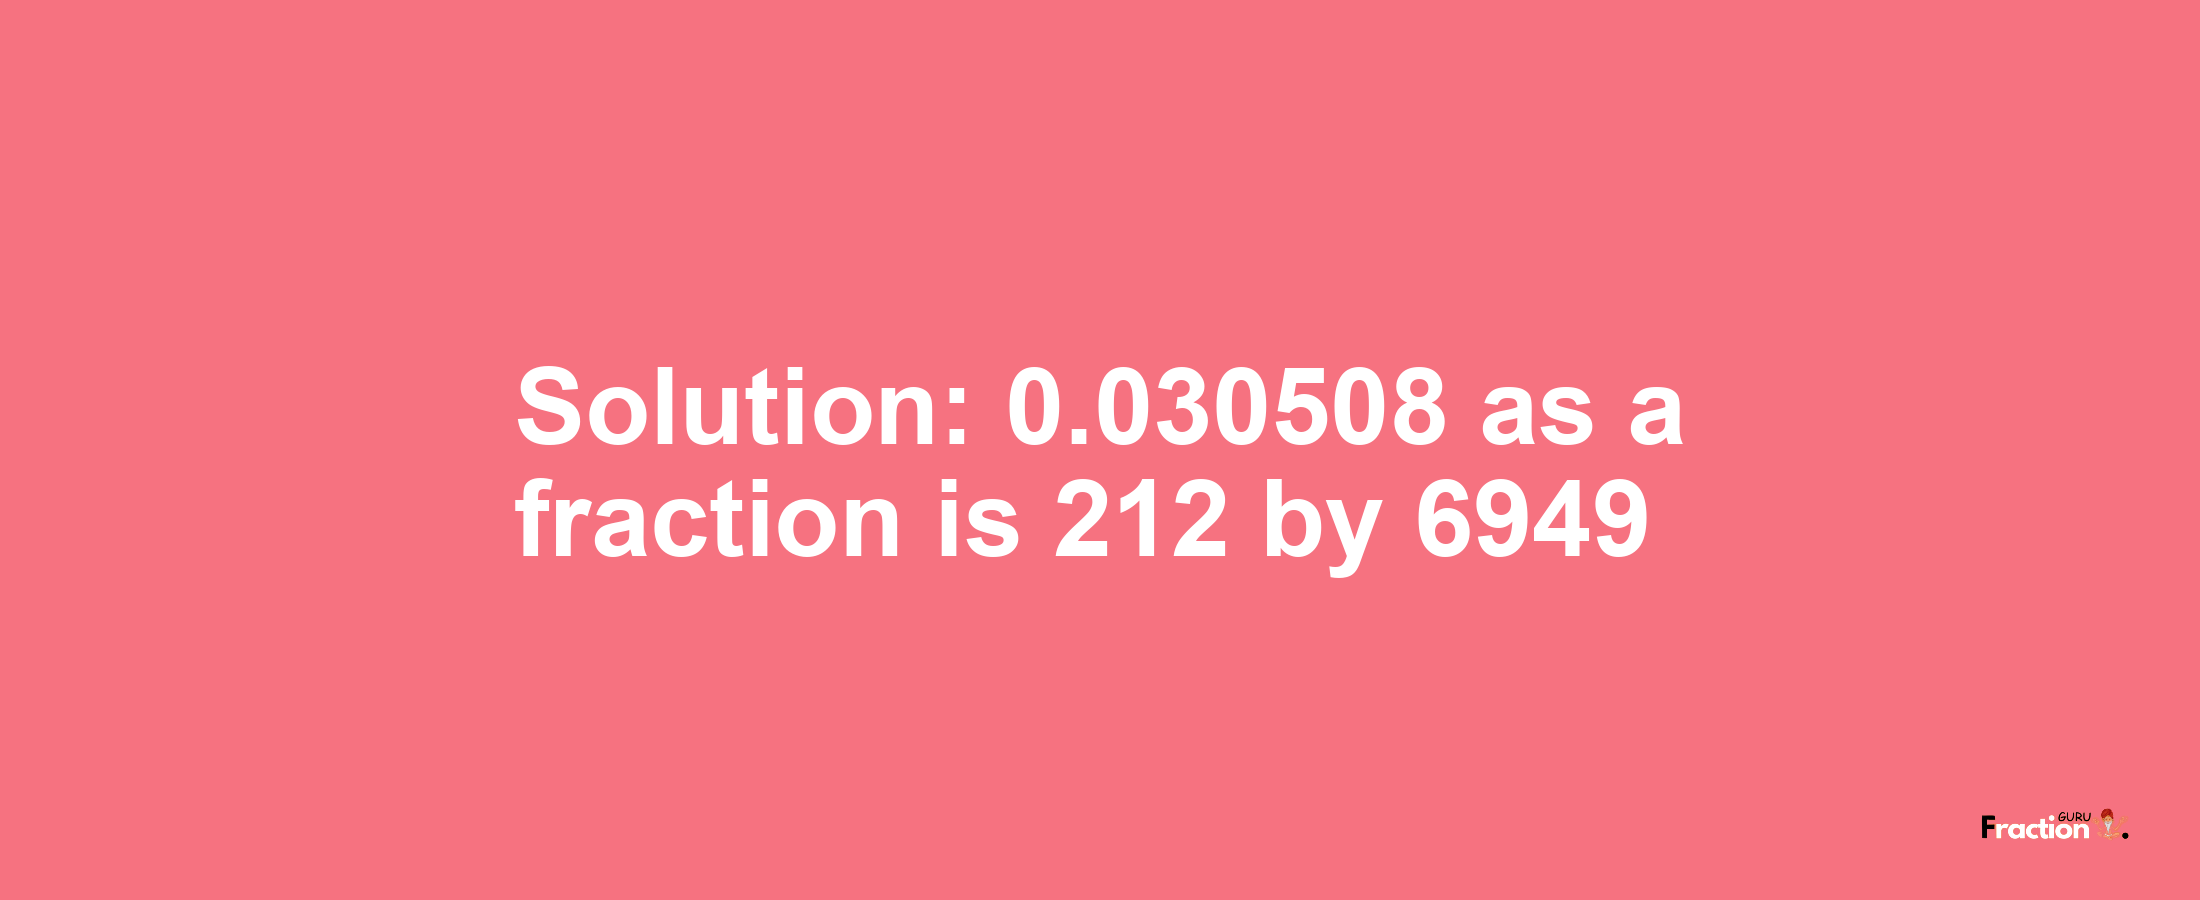 Solution:0.030508 as a fraction is 212/6949